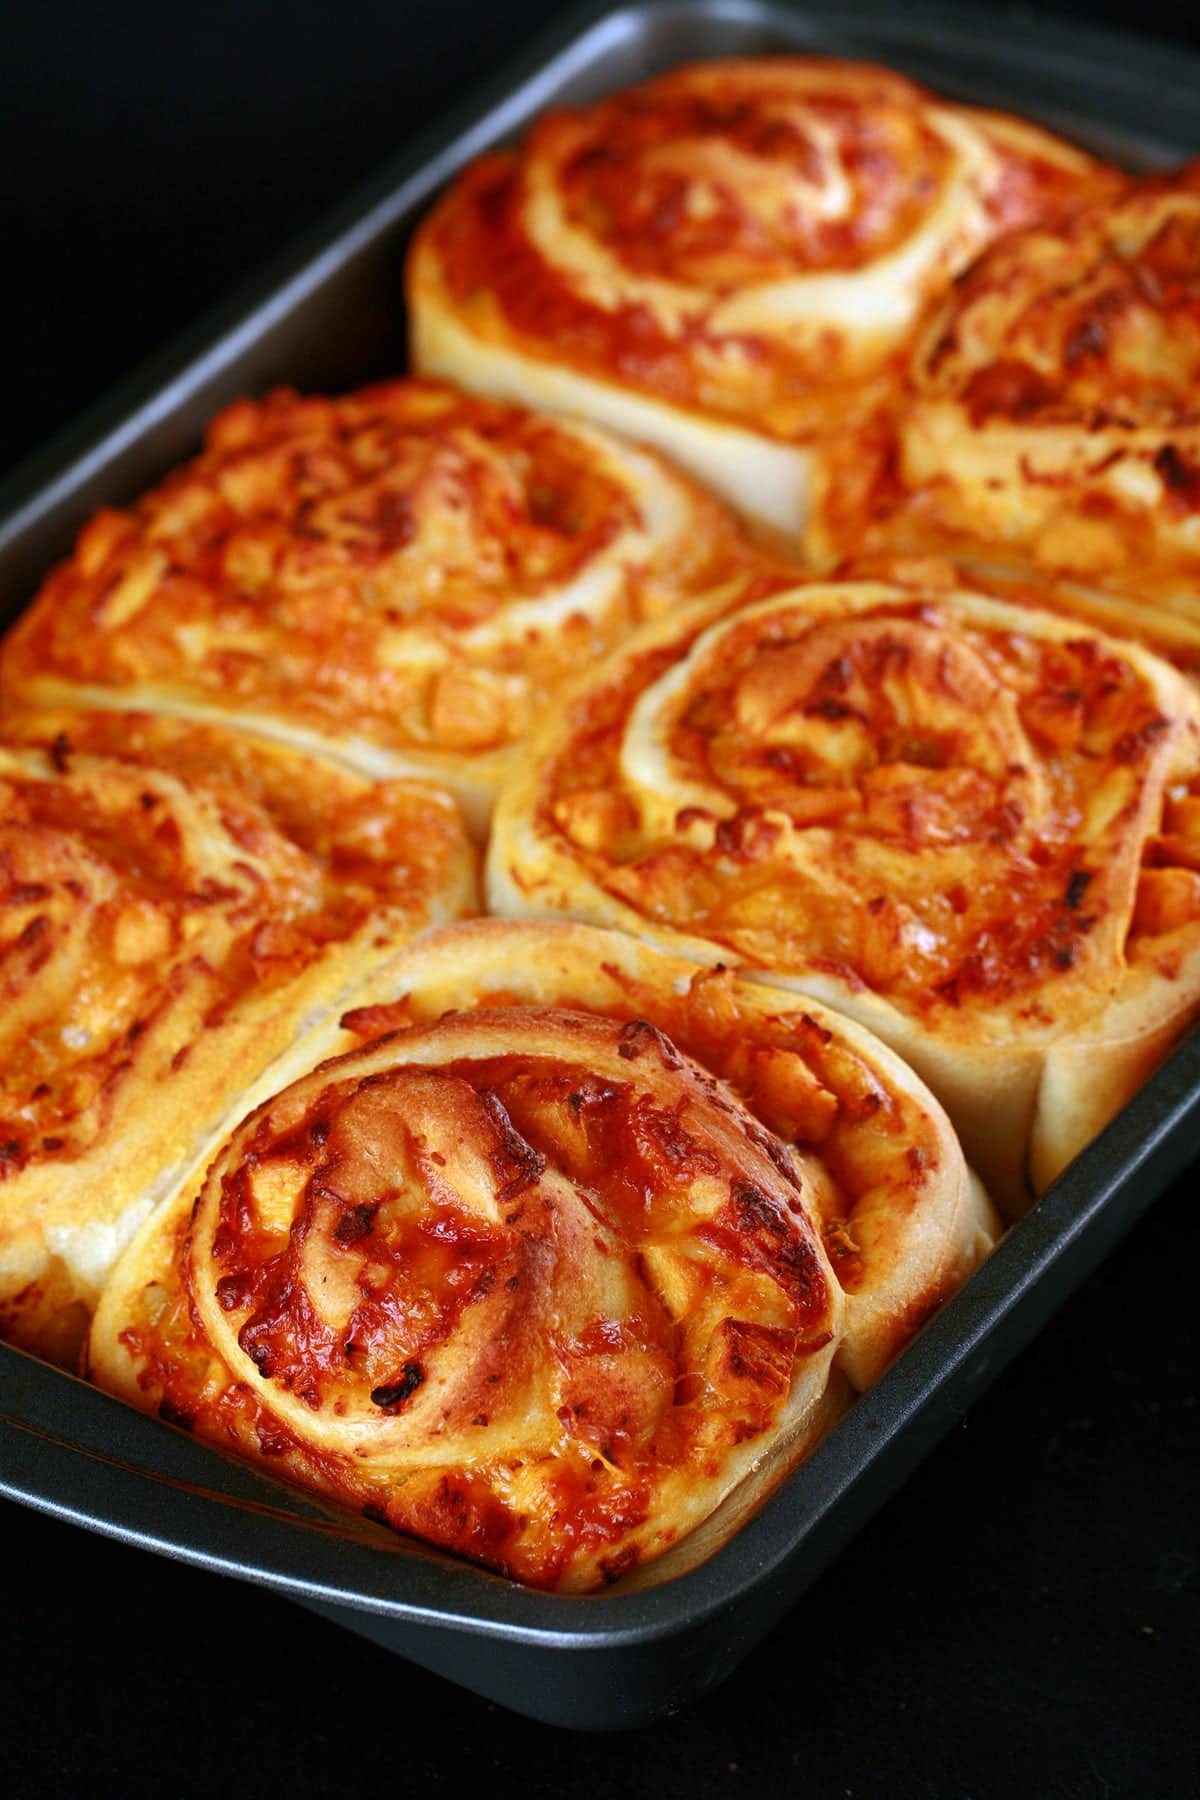 A pan of 6 baked buffalo chicken buns. They resemble cinnamon buns, but with a buffalo chicken and cheese filling.